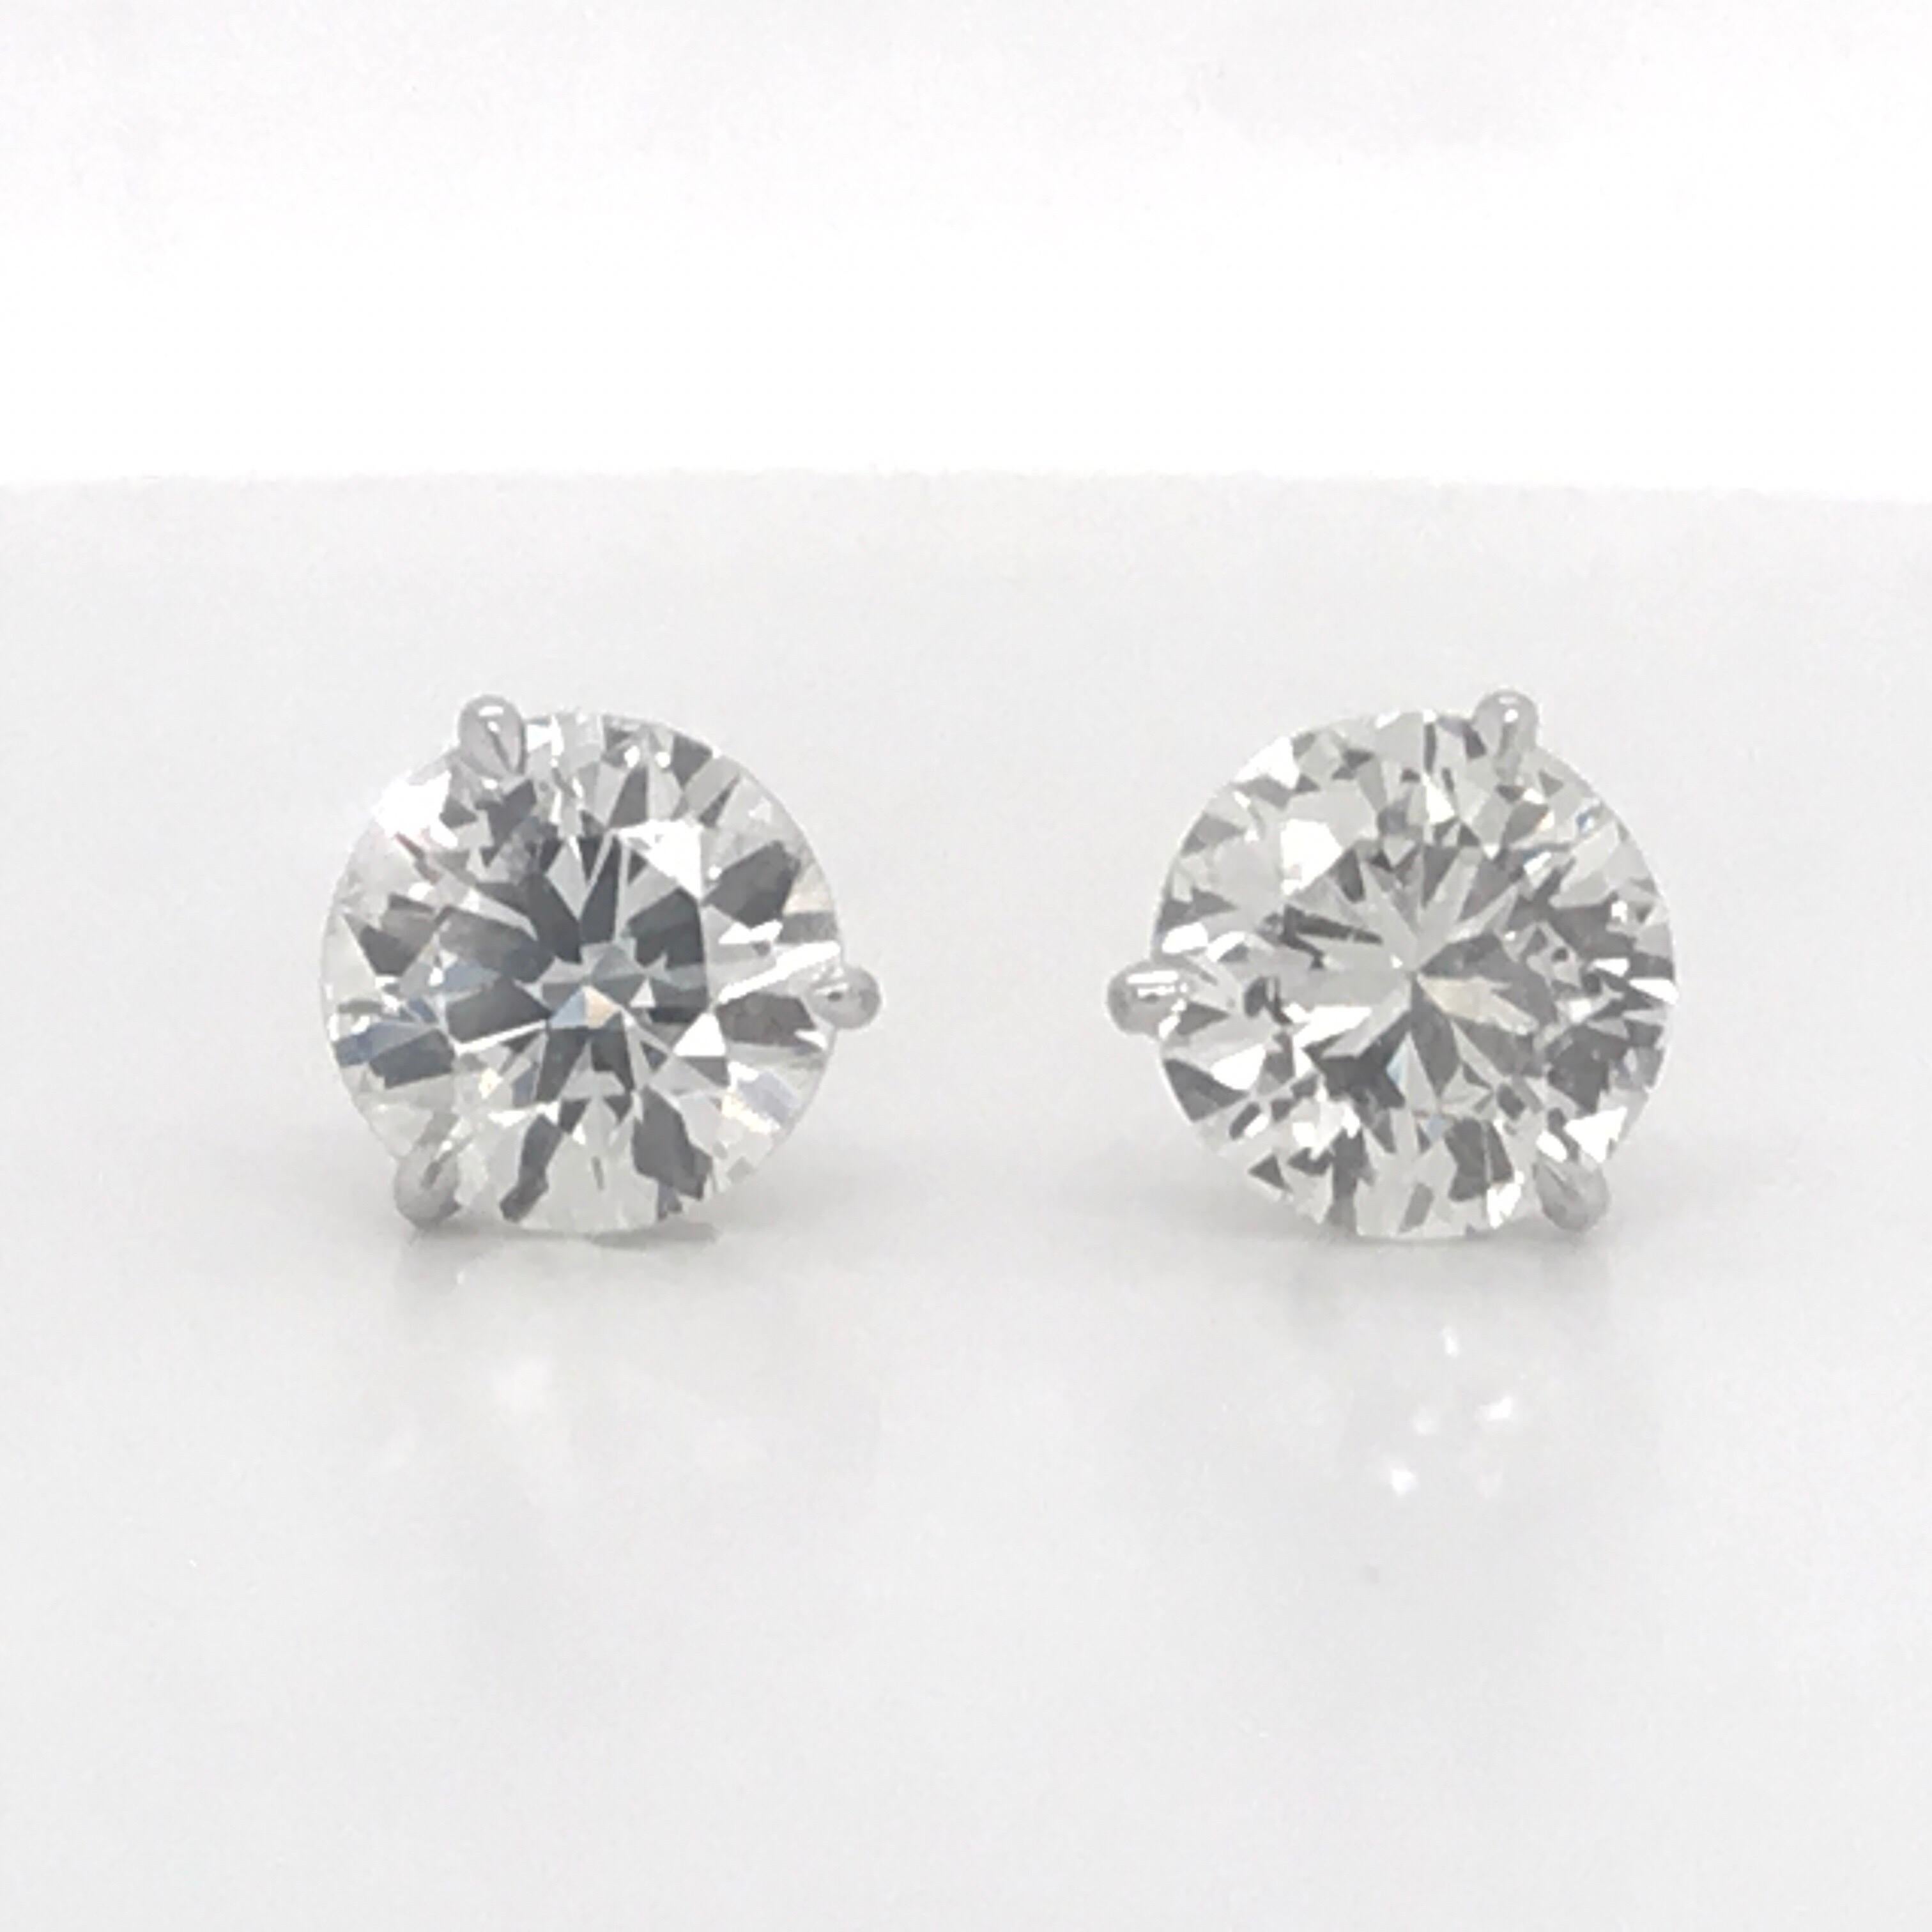 Diamond stud earrings weighing 3.78 Carats in a 18K white gold 3 prong champagne setting.  
Color J 
Clarity SI1-SI2